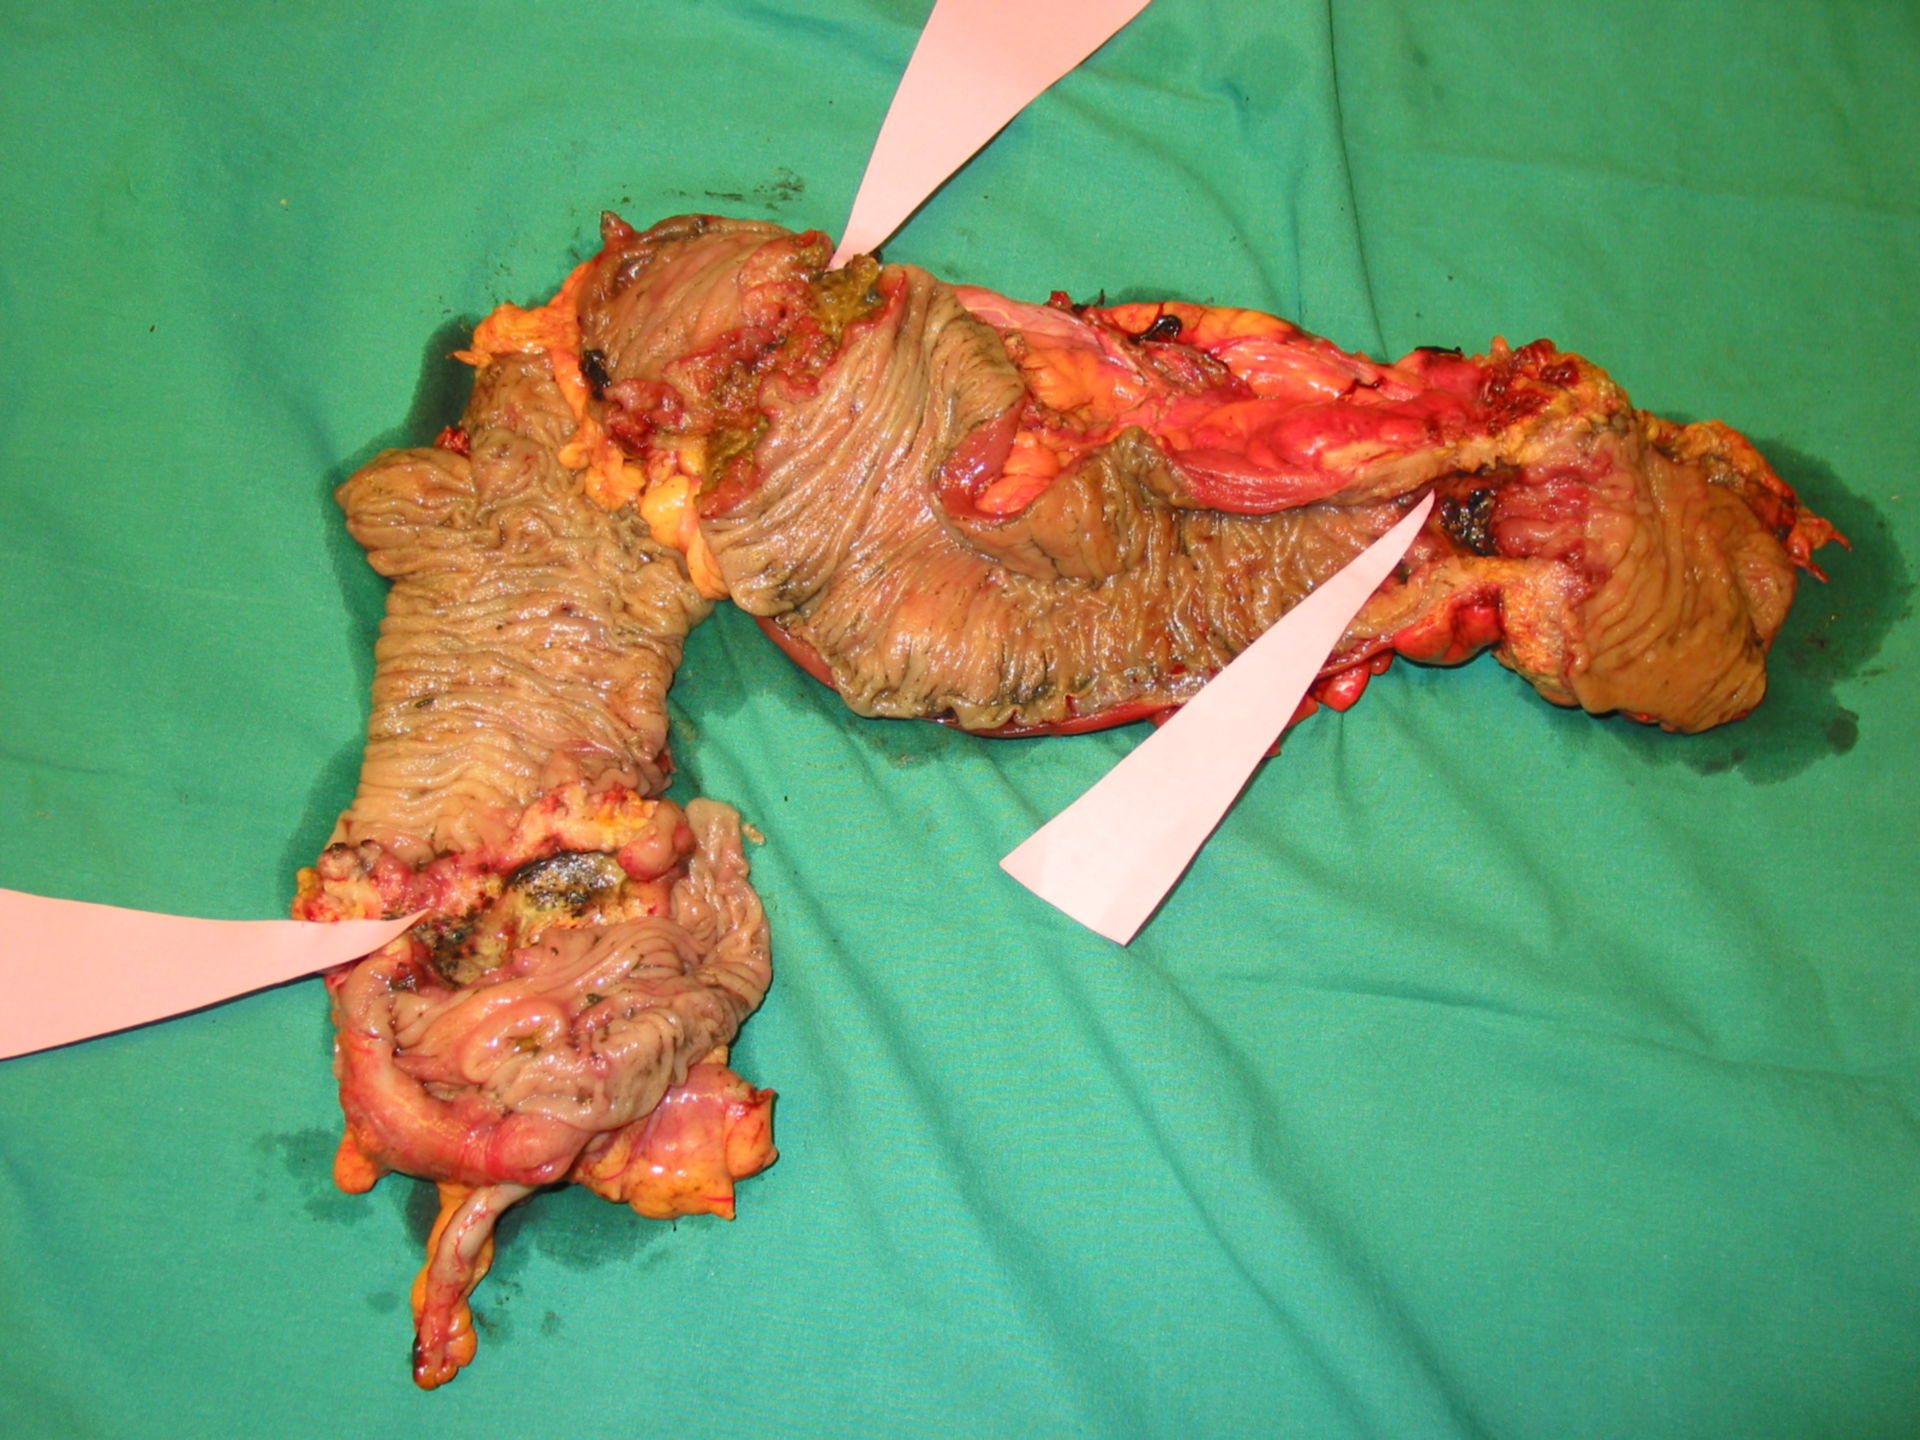 3 colon carcinomas at once in a 71 y.o. patient